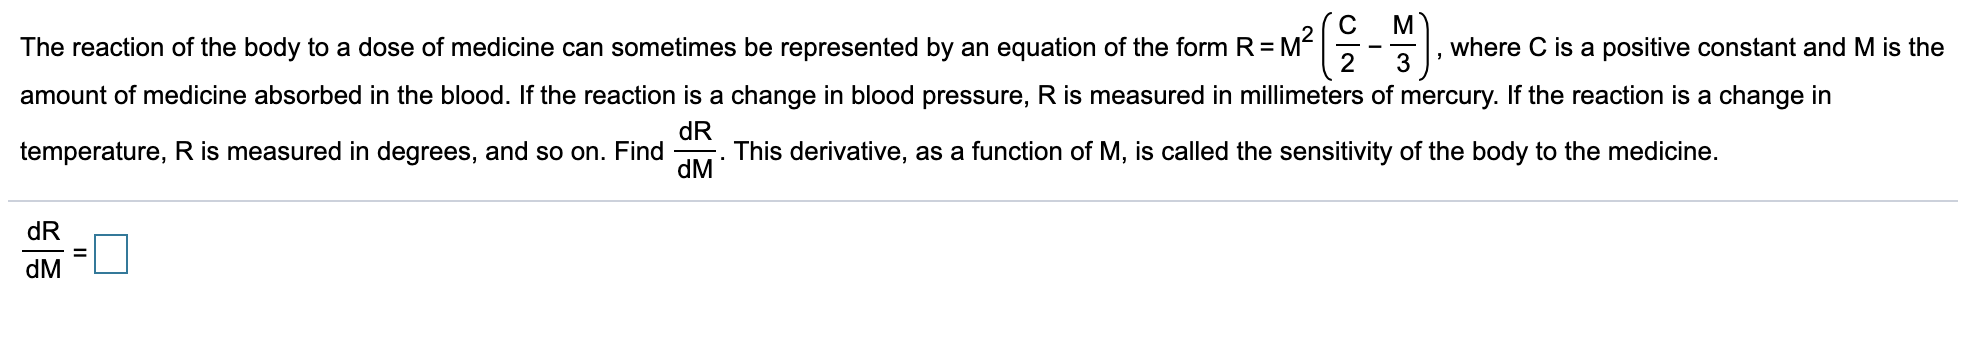 C
M?
(을-)
M
where C is a positive constant and M is the
The reaction of the body to a dose of medicine can sometimes be represented by an equation of the form R =
amount of medicine absorbed in the blood. If the reaction is a change in blood pressure, R is measured in millimeters of mercury. If the reaction is a change in
temperature, R is measured in degrees, and so on. Find
dR
This derivative, as a function of M, is called the sensitivity of the body to the medicine.
dM
